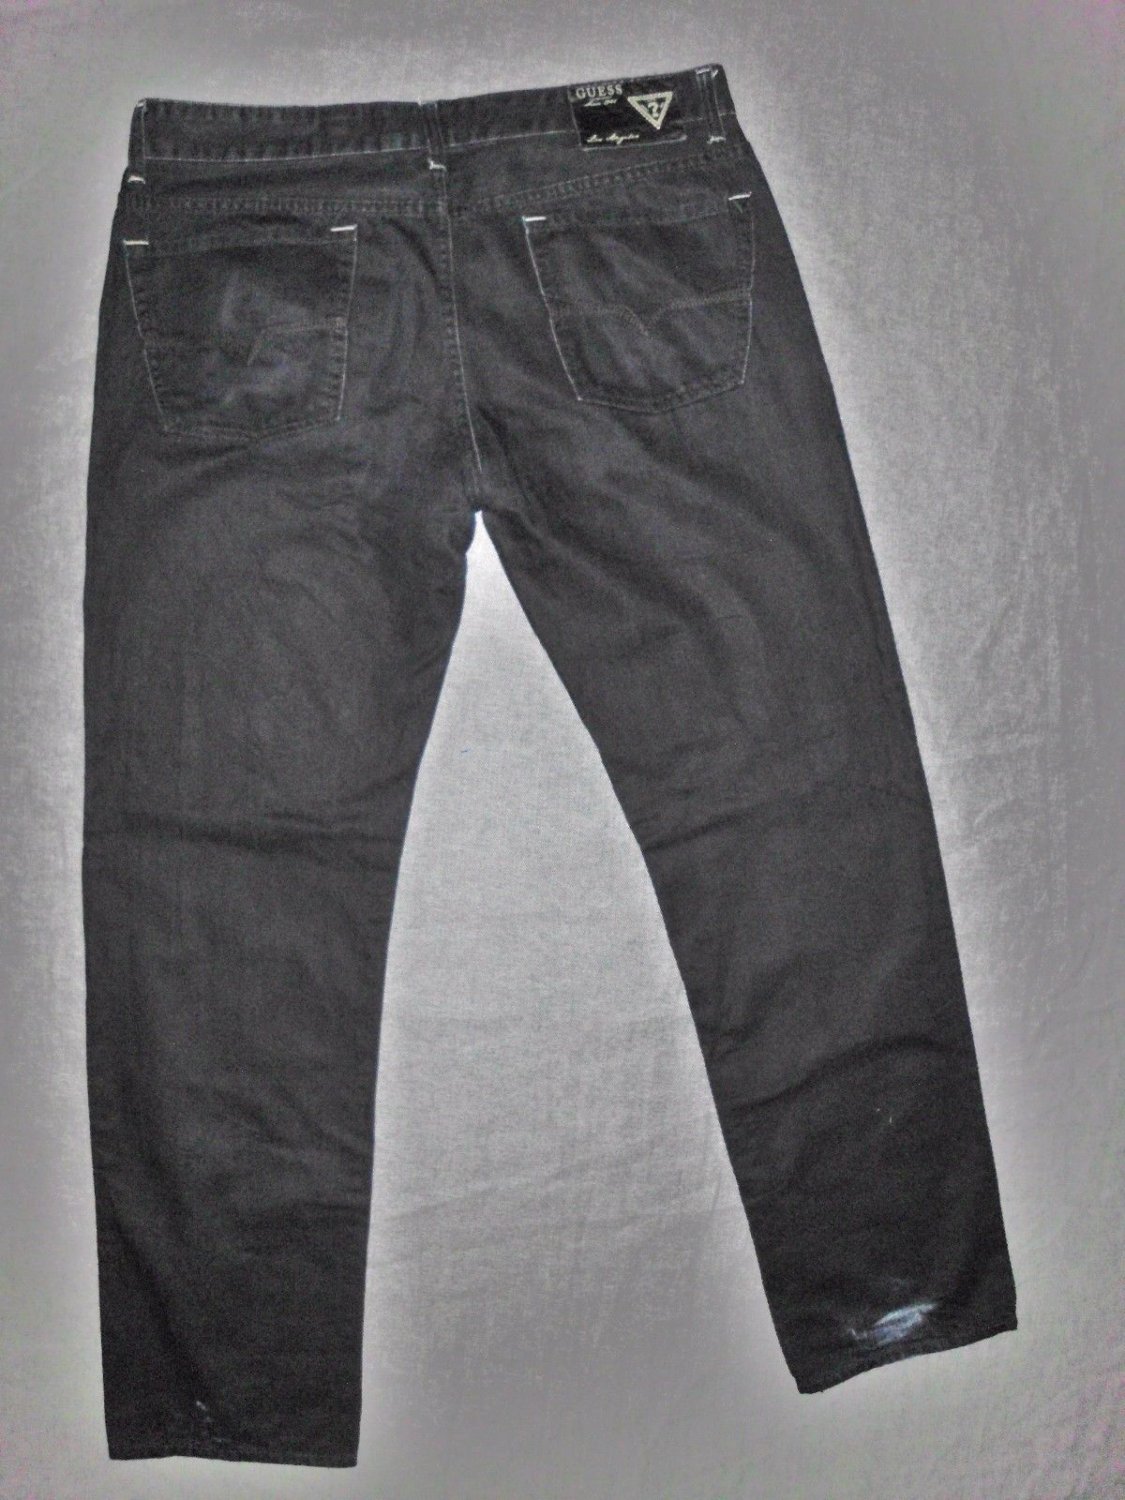 GUESS Men's Jeans LINCOLN SLIM Straight Size 36 X 33